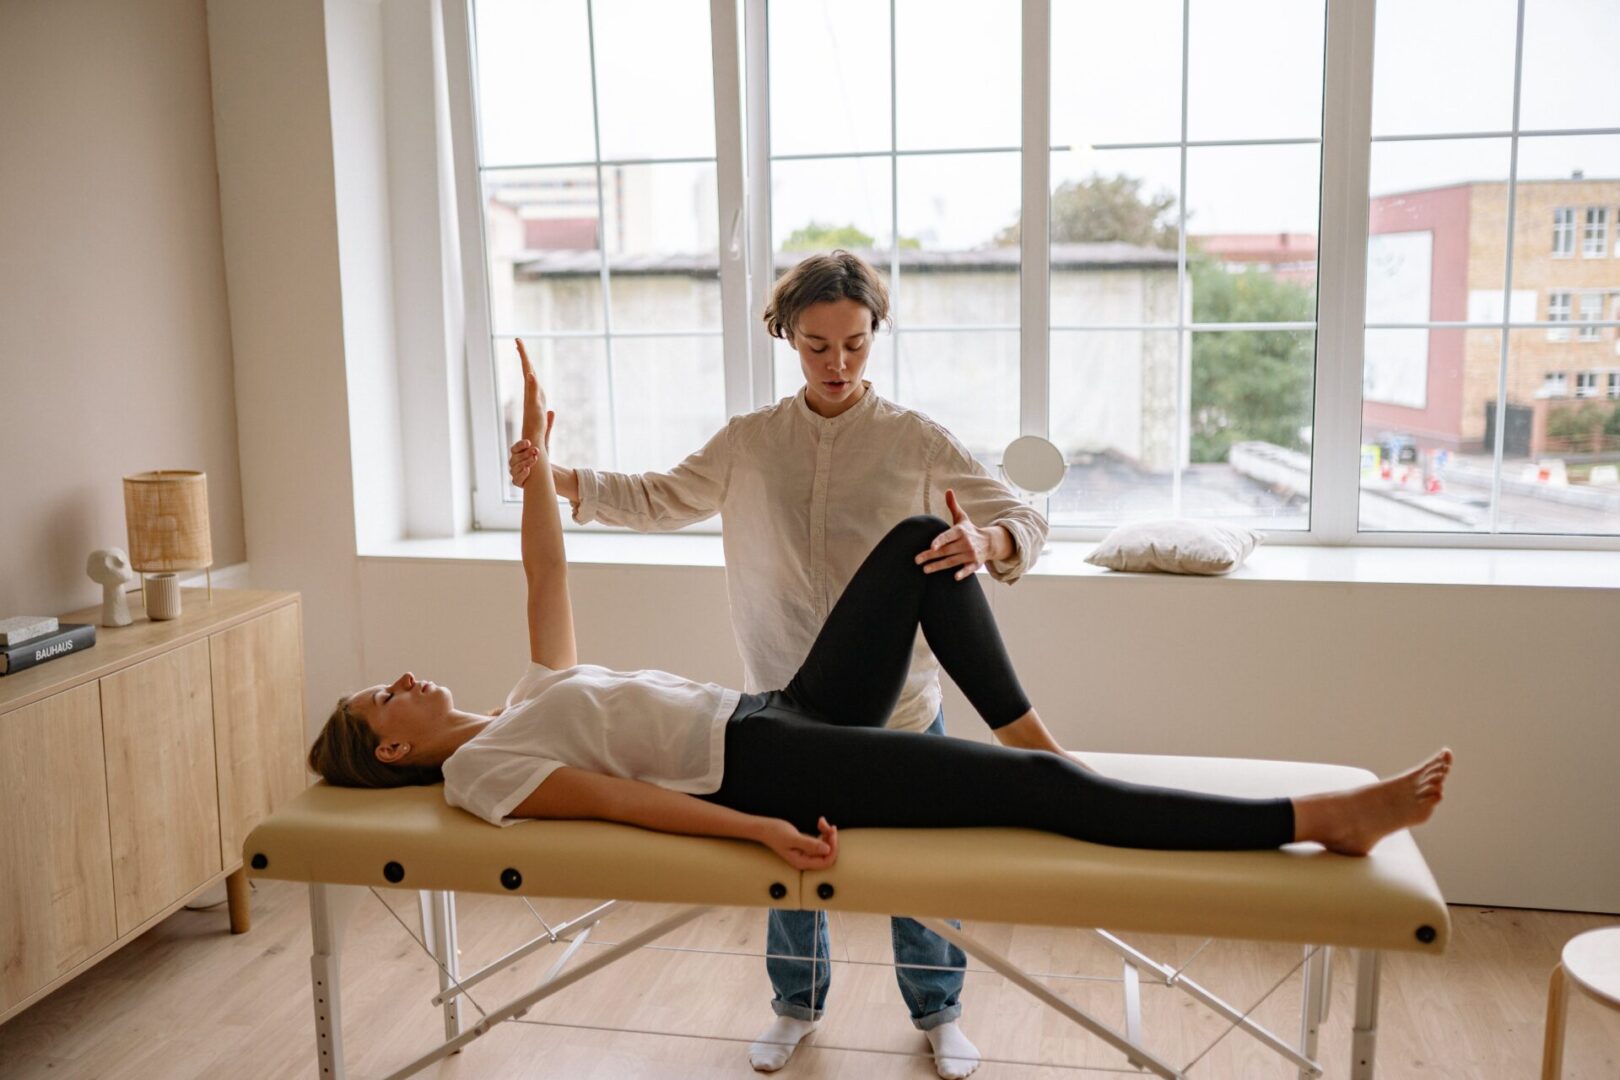 A woman is stretching on the bed while another person watches.